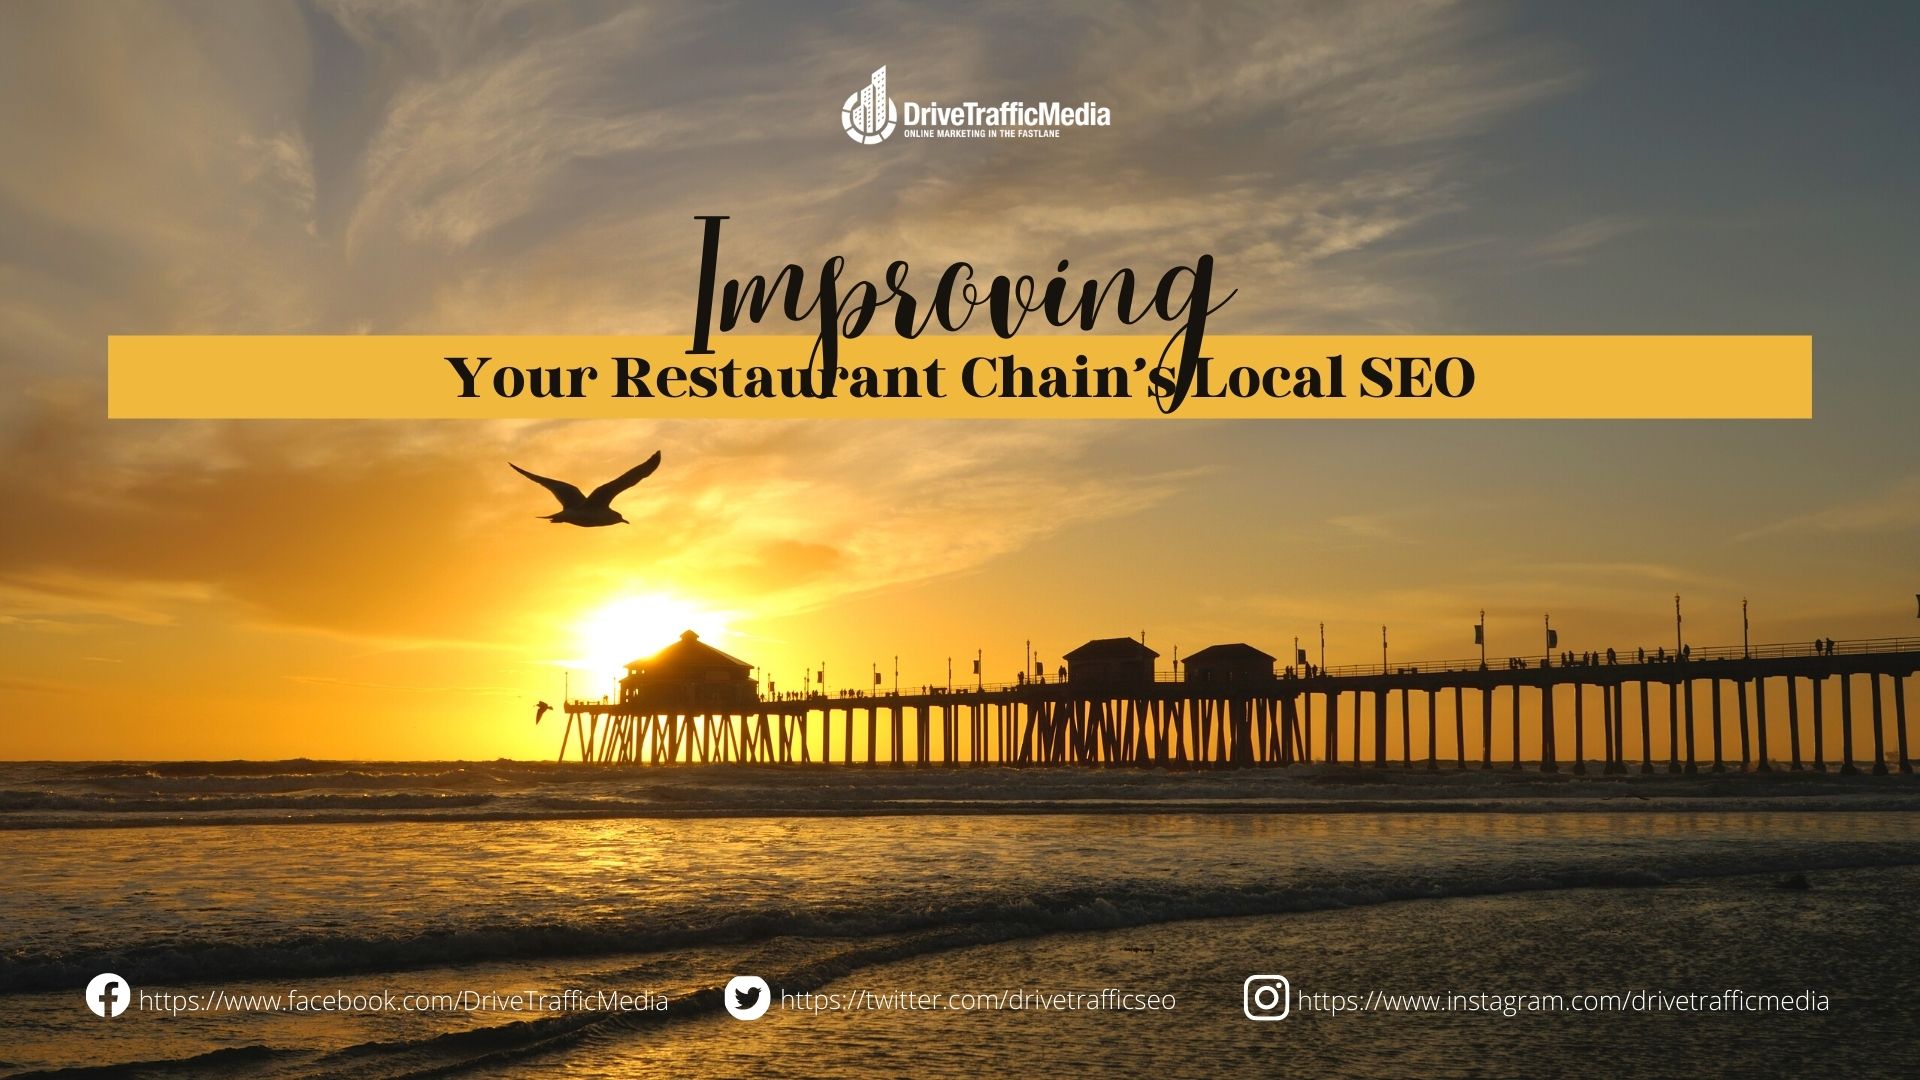 seo-guide-for-restaurant-chains